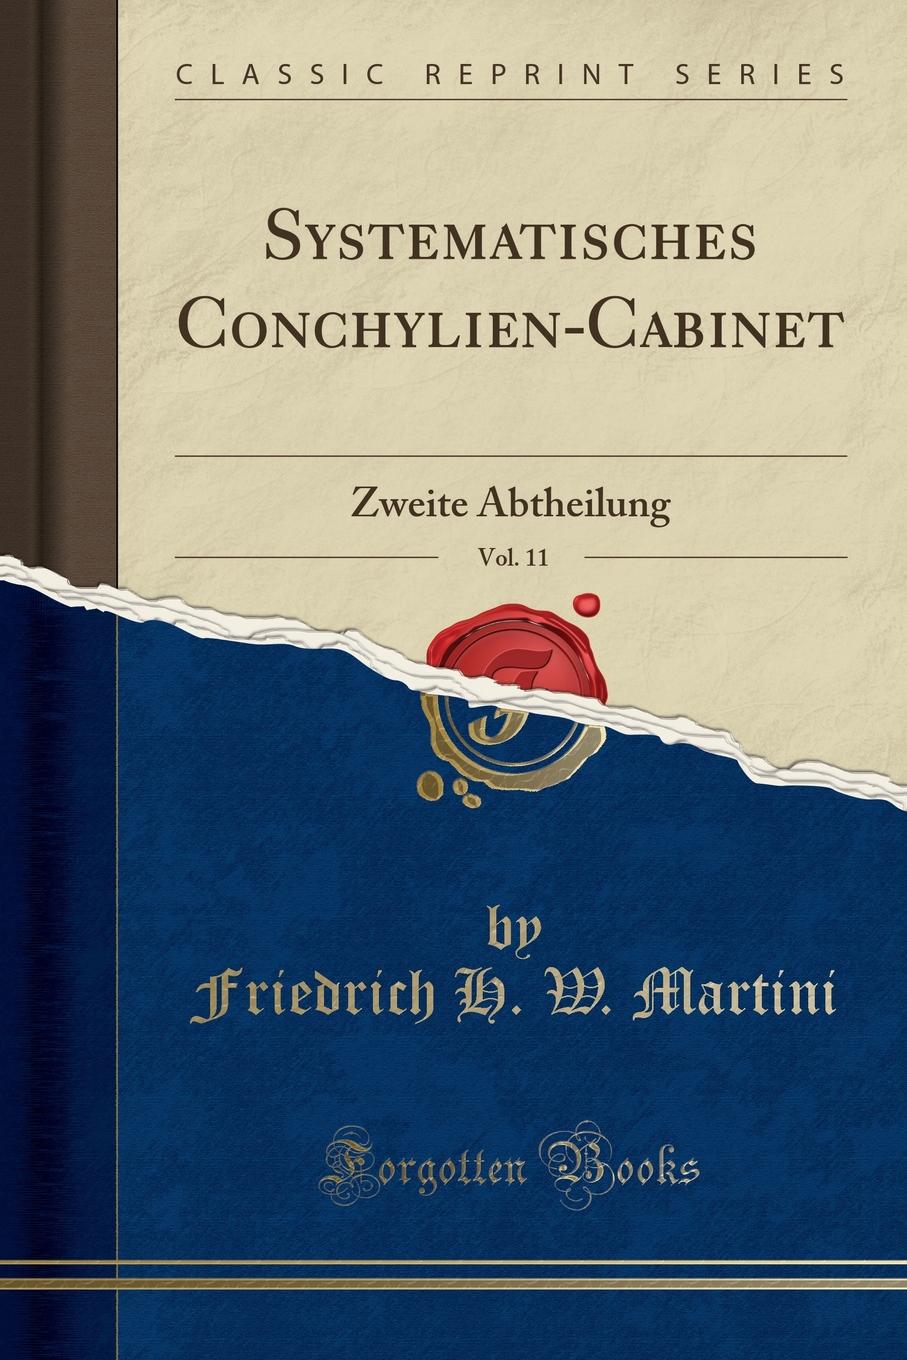 фото Systematisches Conchylien-Cabinet, Vol. 11. Zweite Abtheilung (Classic Reprint)